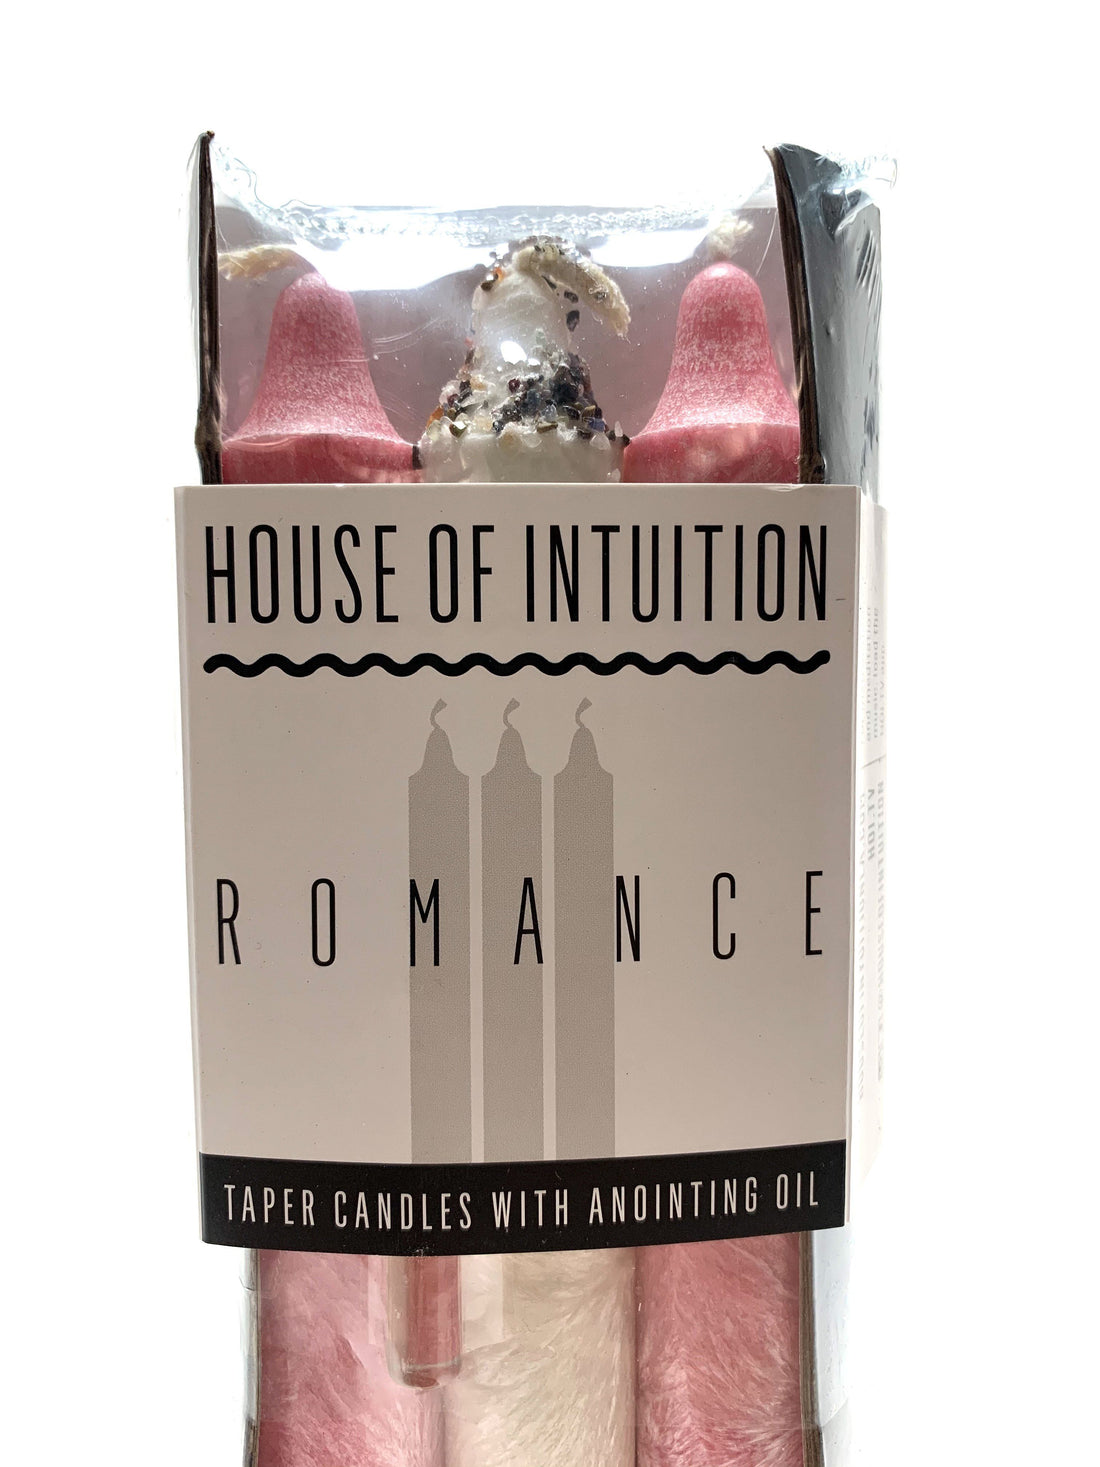 Taper Intention Candle Set - Romance Taper Intention Candles House of Intuition 